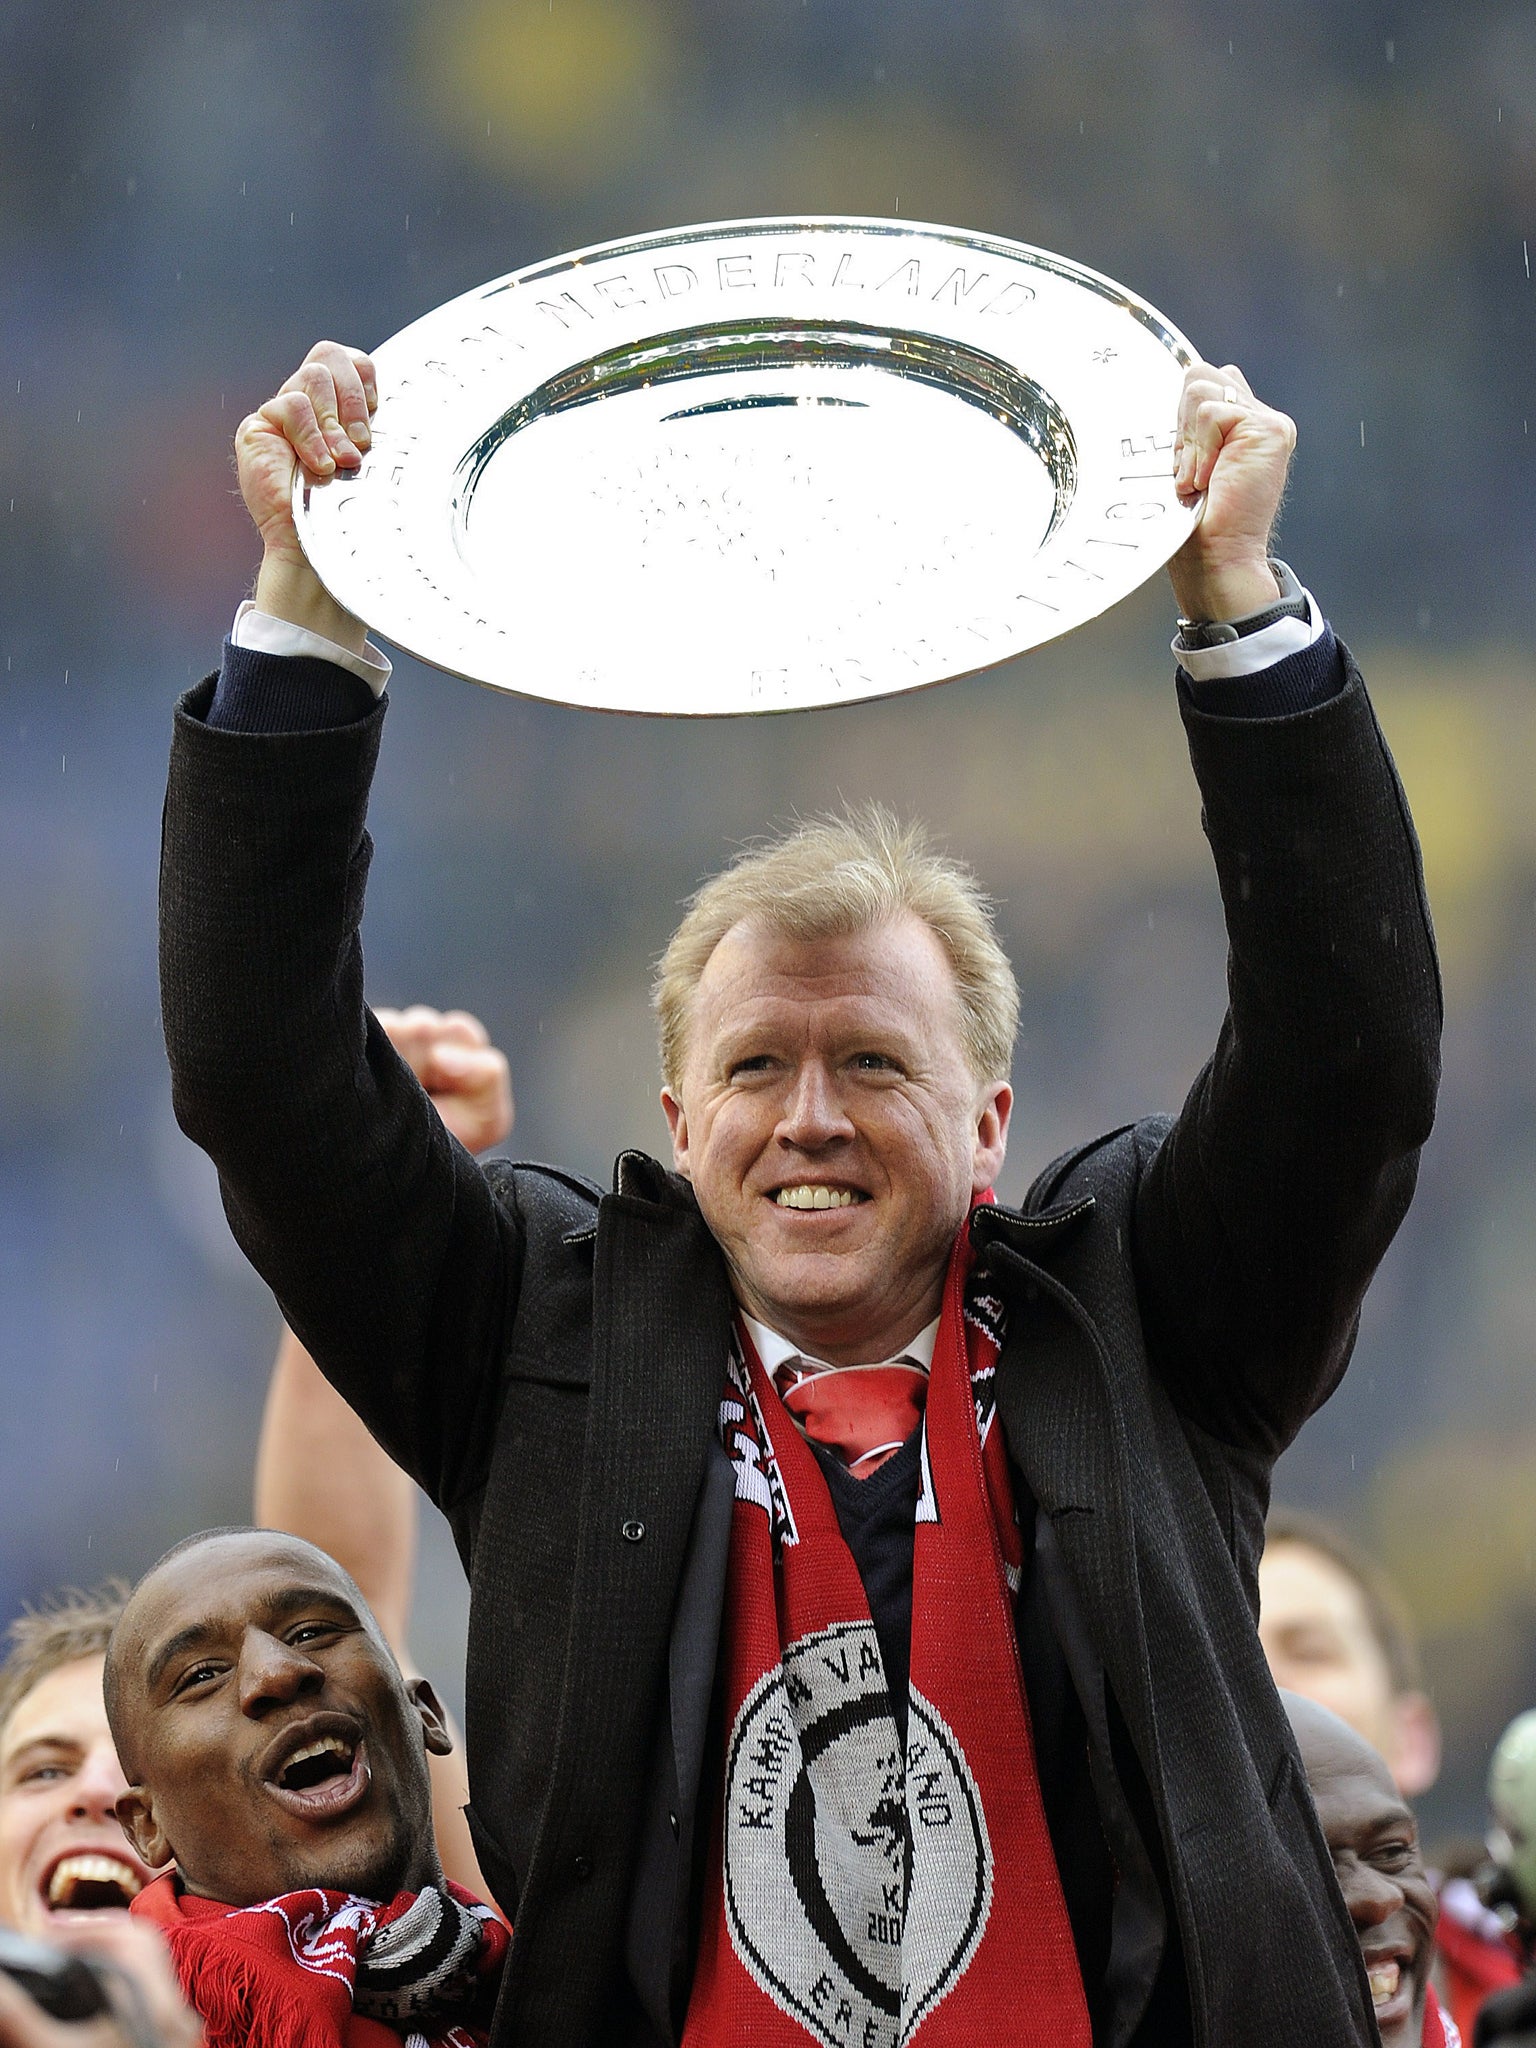 Steve McClaren poses with the Eredivisie trophy after Twente won the Dutch championship